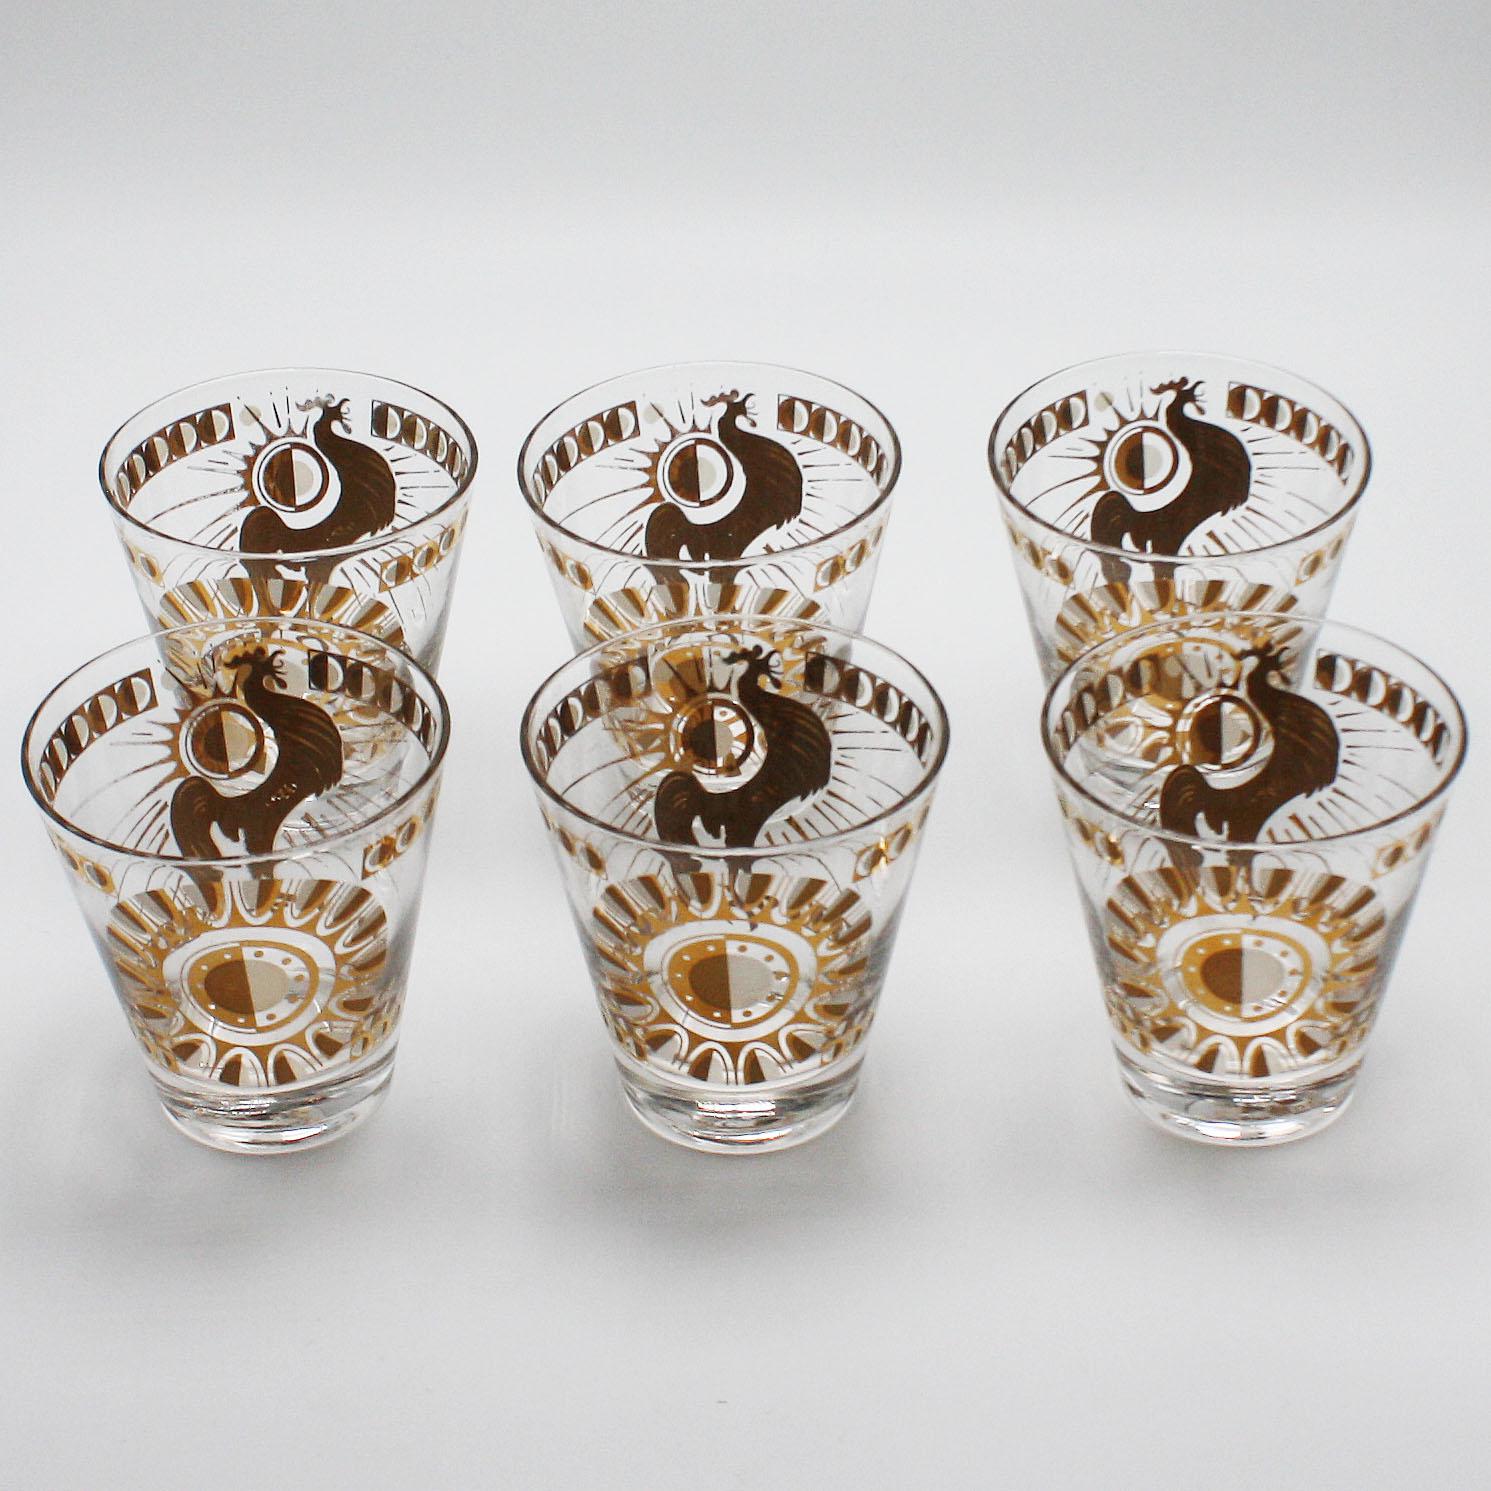 Set of six gold rooster and sunburst glasses by Fred Press, circa 1960.
$625.